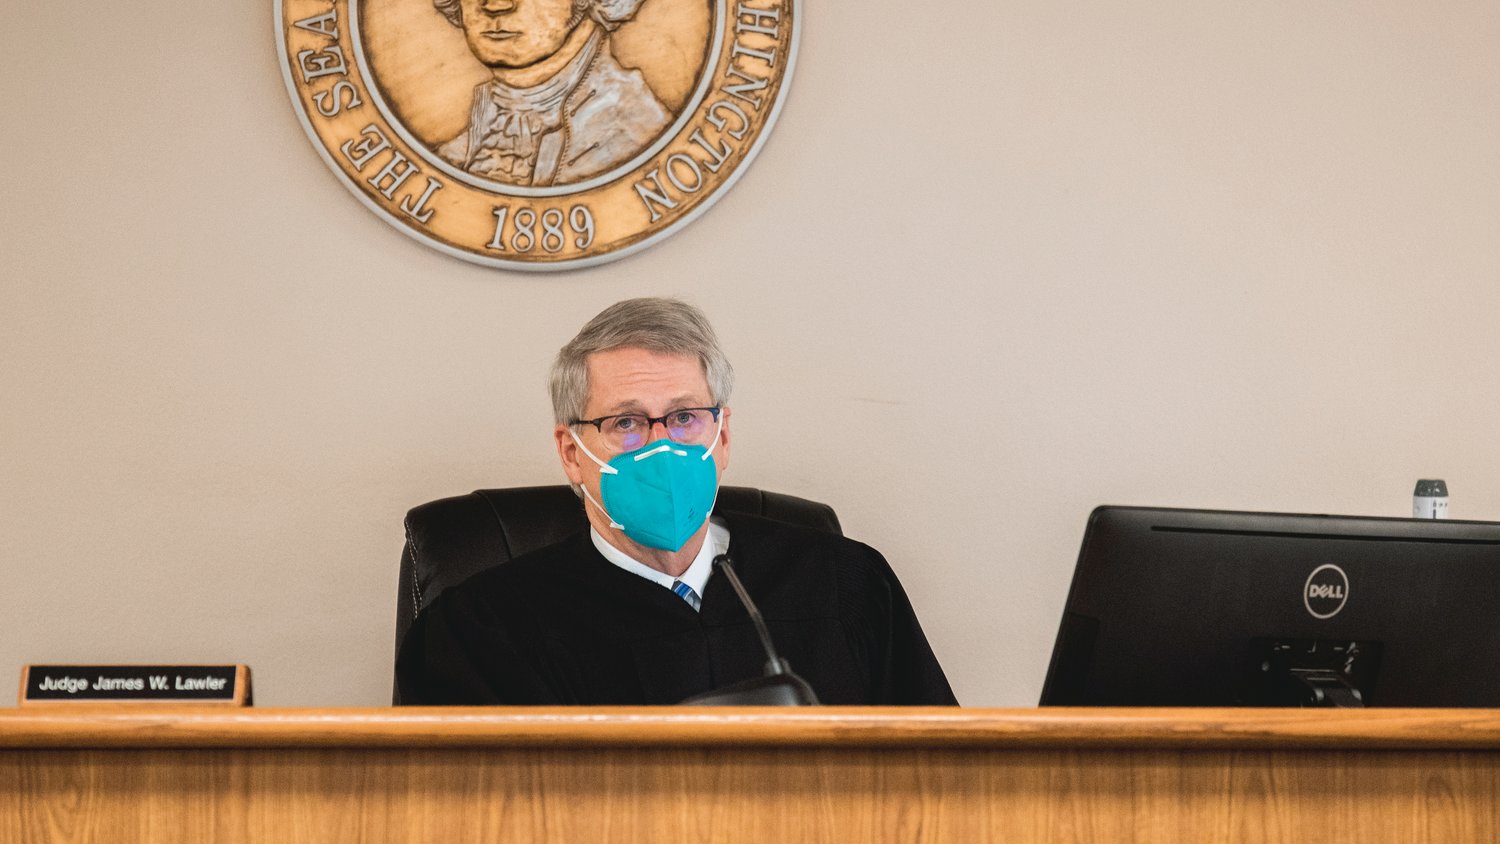 Judge James W. Lawler sports a mask as he presides over Lewis County Superior Court earlier this month.